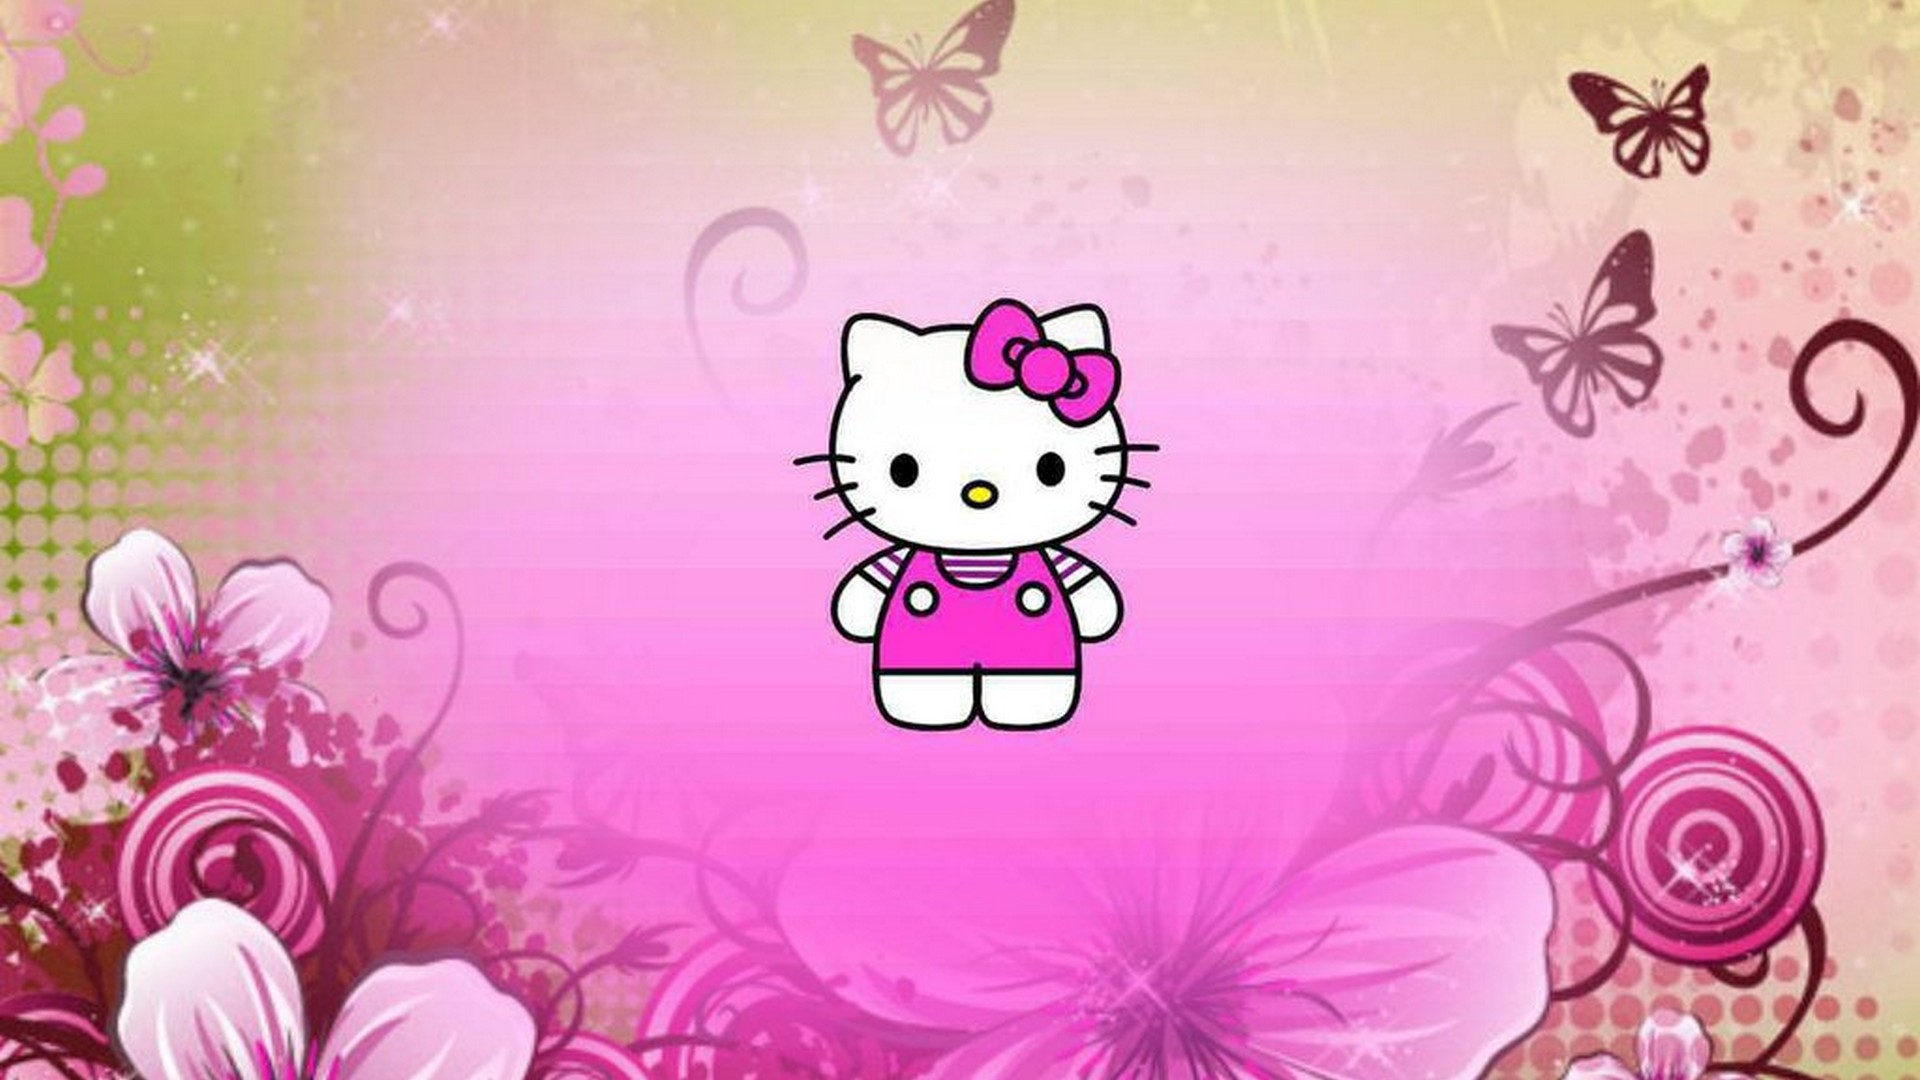 Wallpaper Sanrio Hello Kitty HD with image resolution 1920x1080 pixel. You can make this wallpaper for your Desktop Computer Backgrounds, Mac Wallpapers, Android Lock screen or iPhone Screensavers